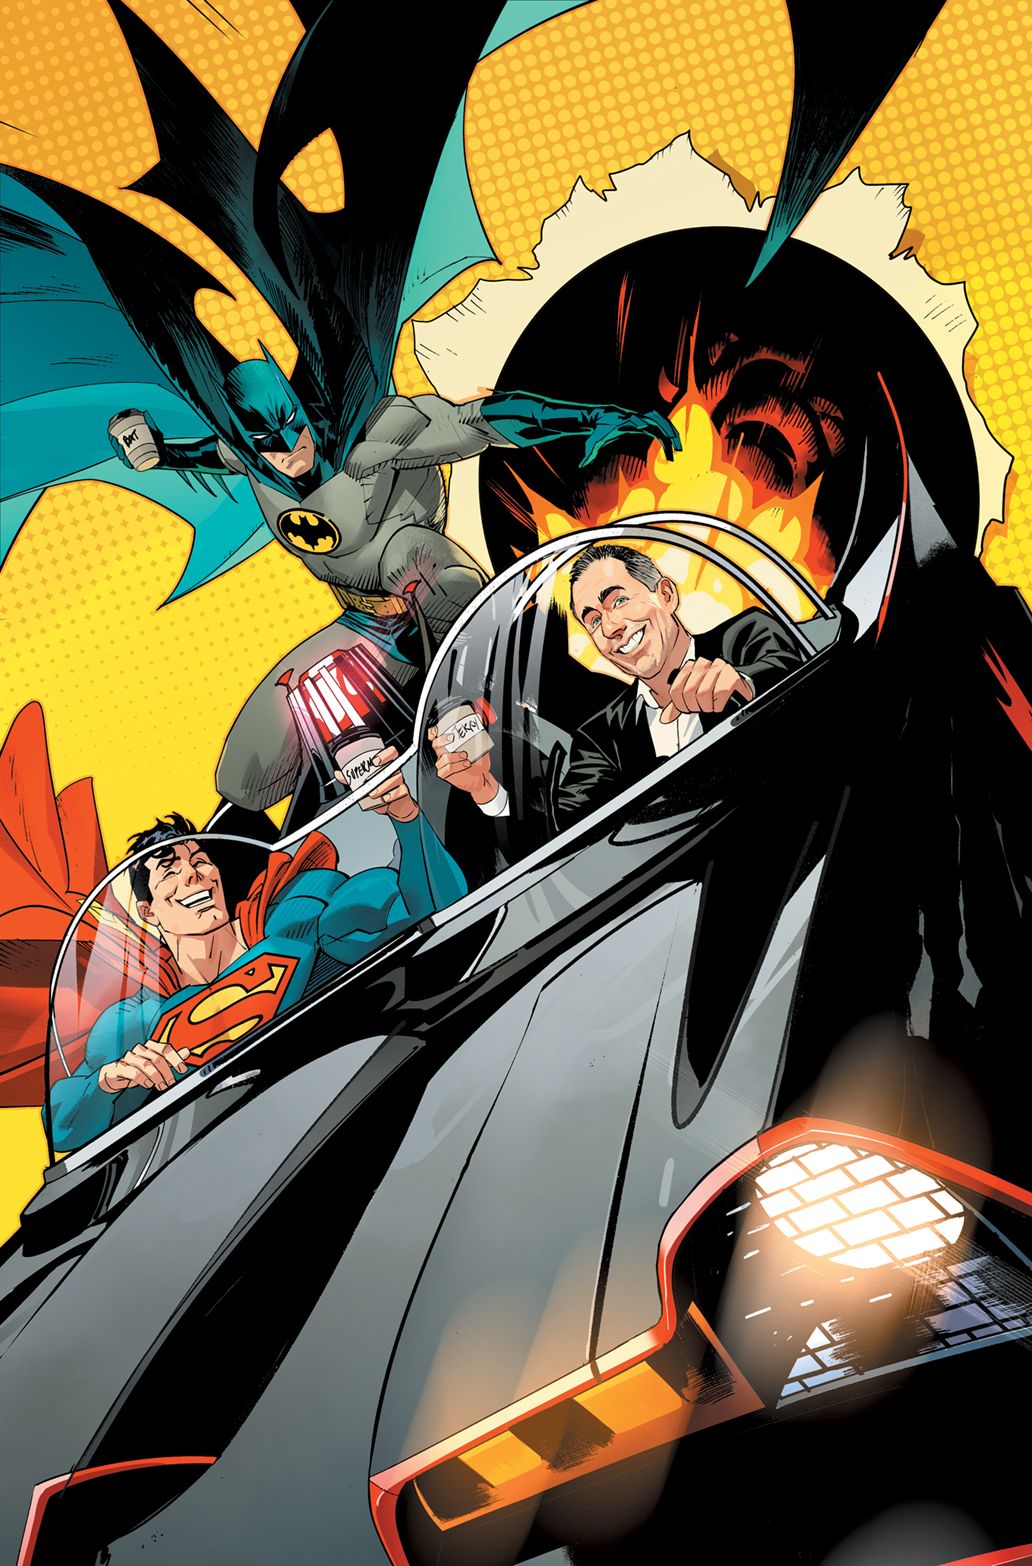 Jerry Seinfeld teaming up with Superman and Batman in World's Finest 1 by Dan Mora